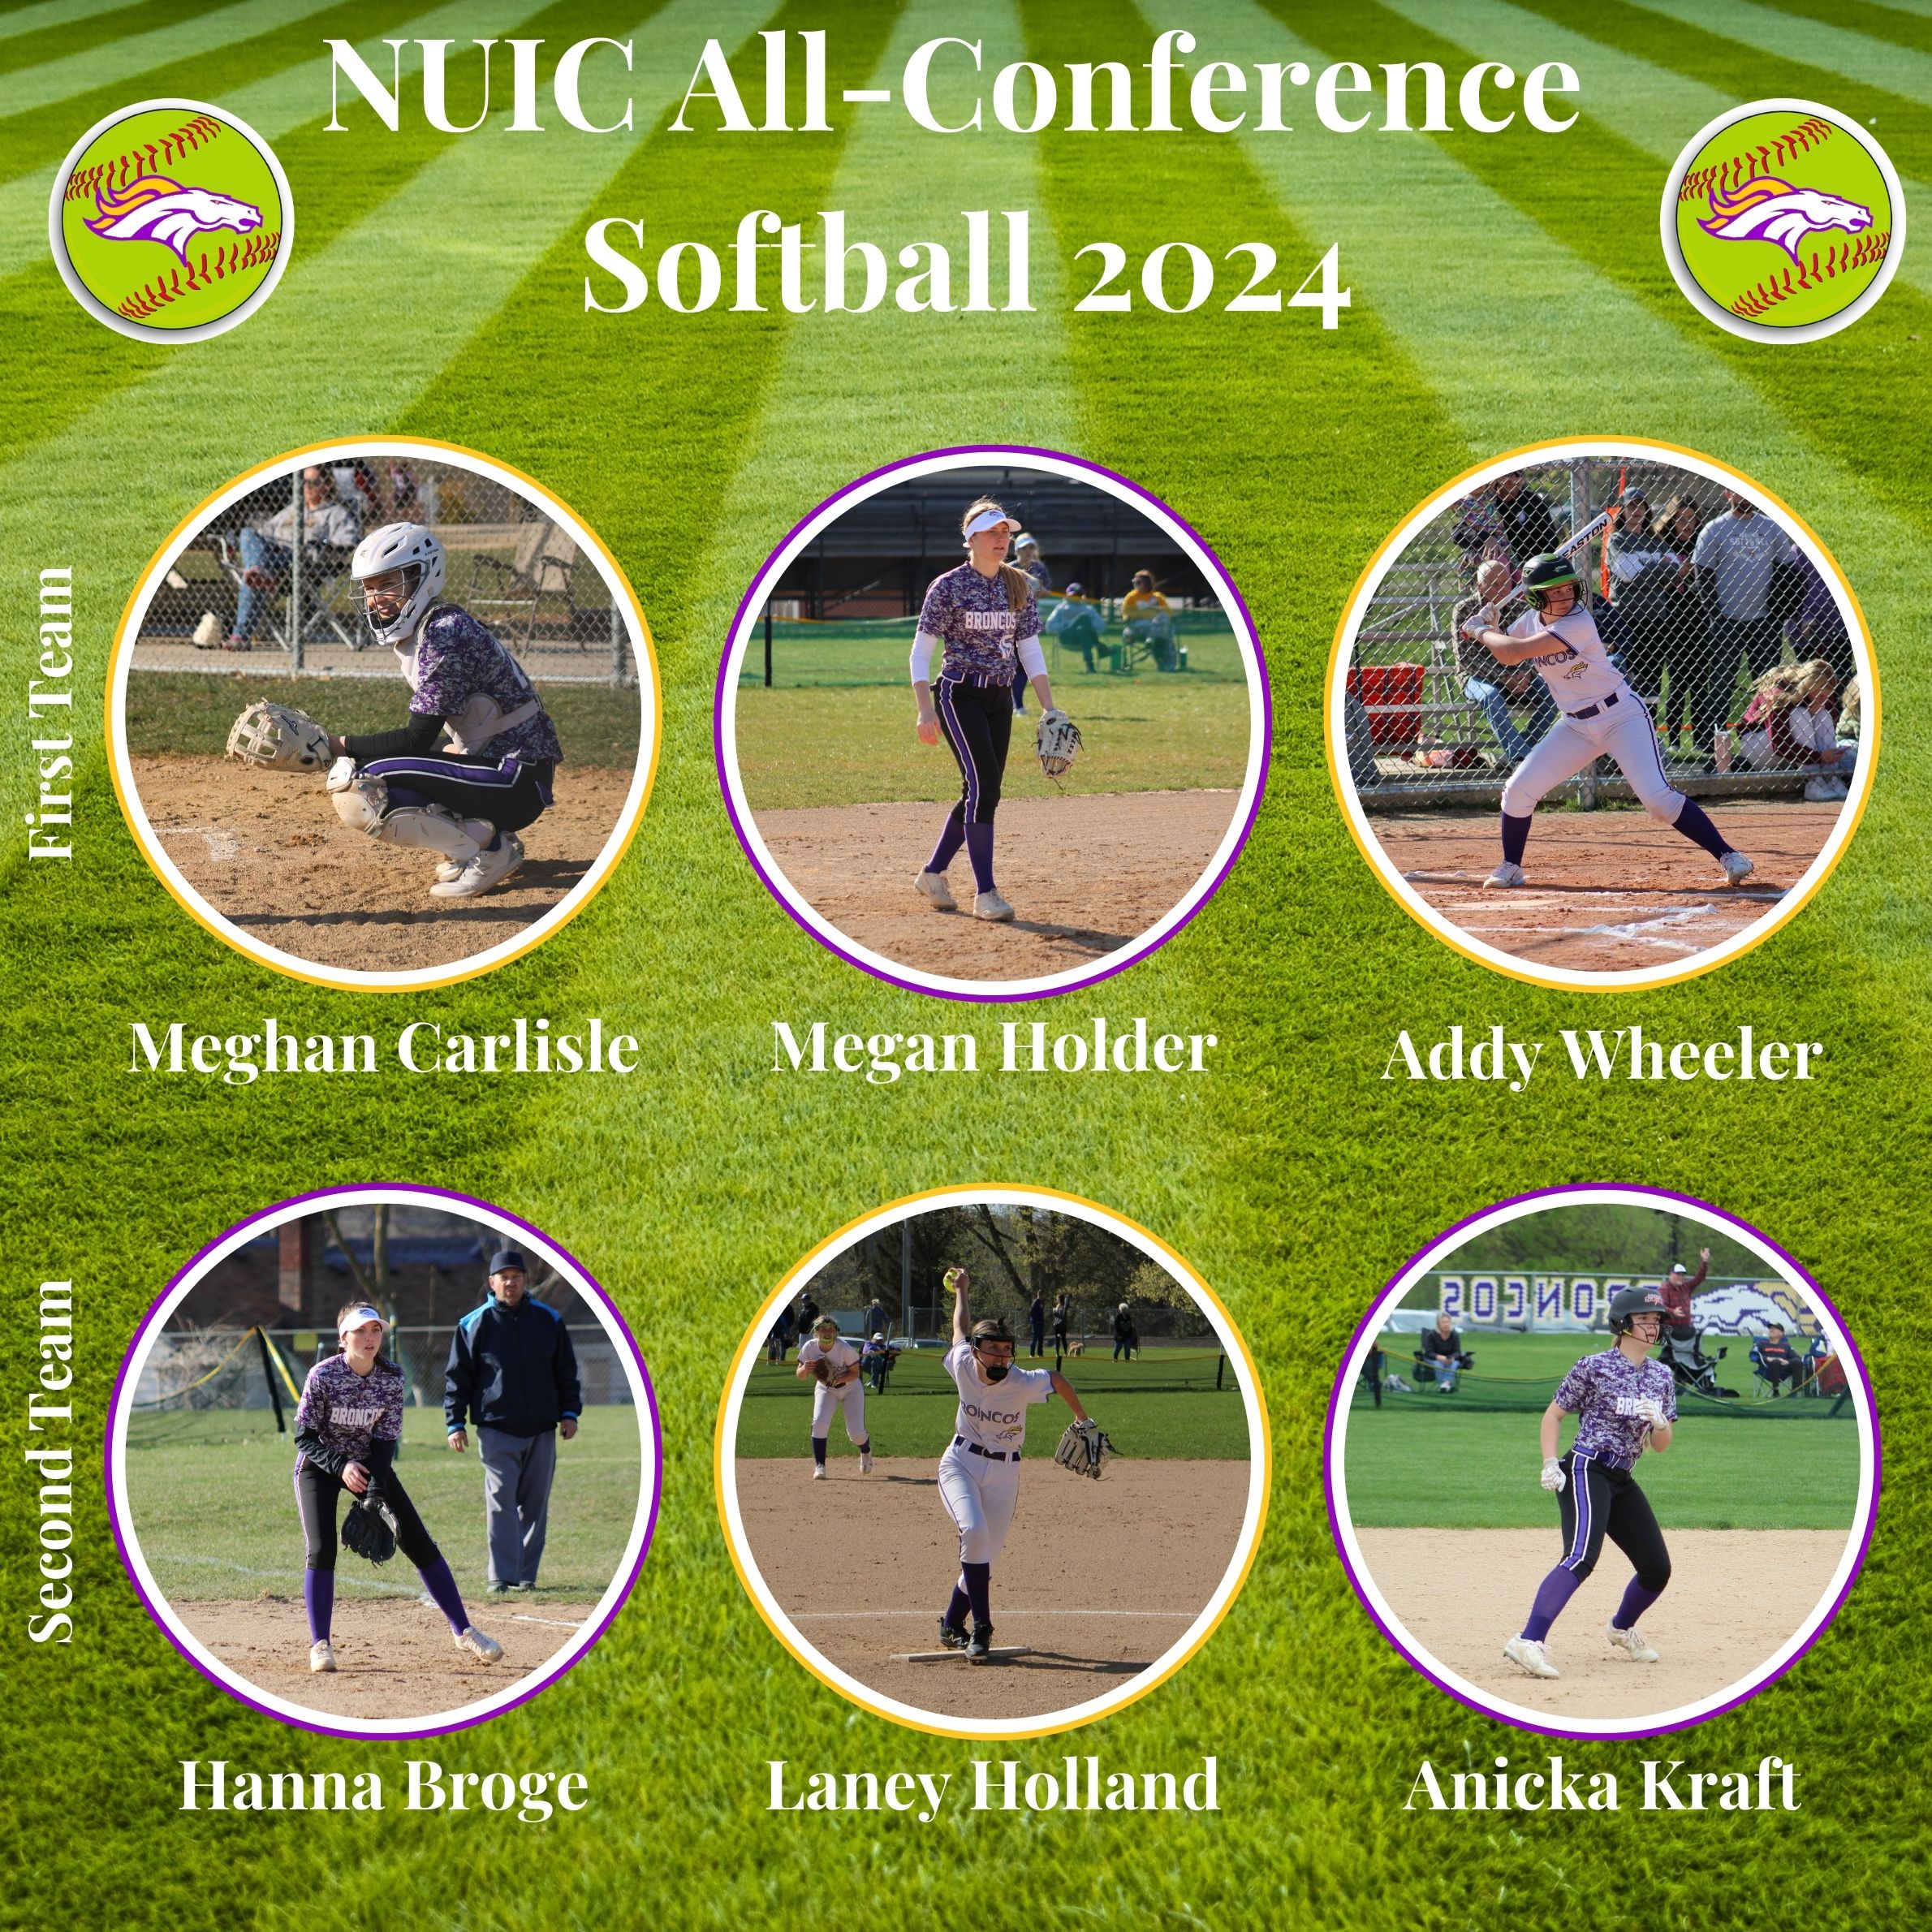 NUIC All Conference Softball 2024 collage